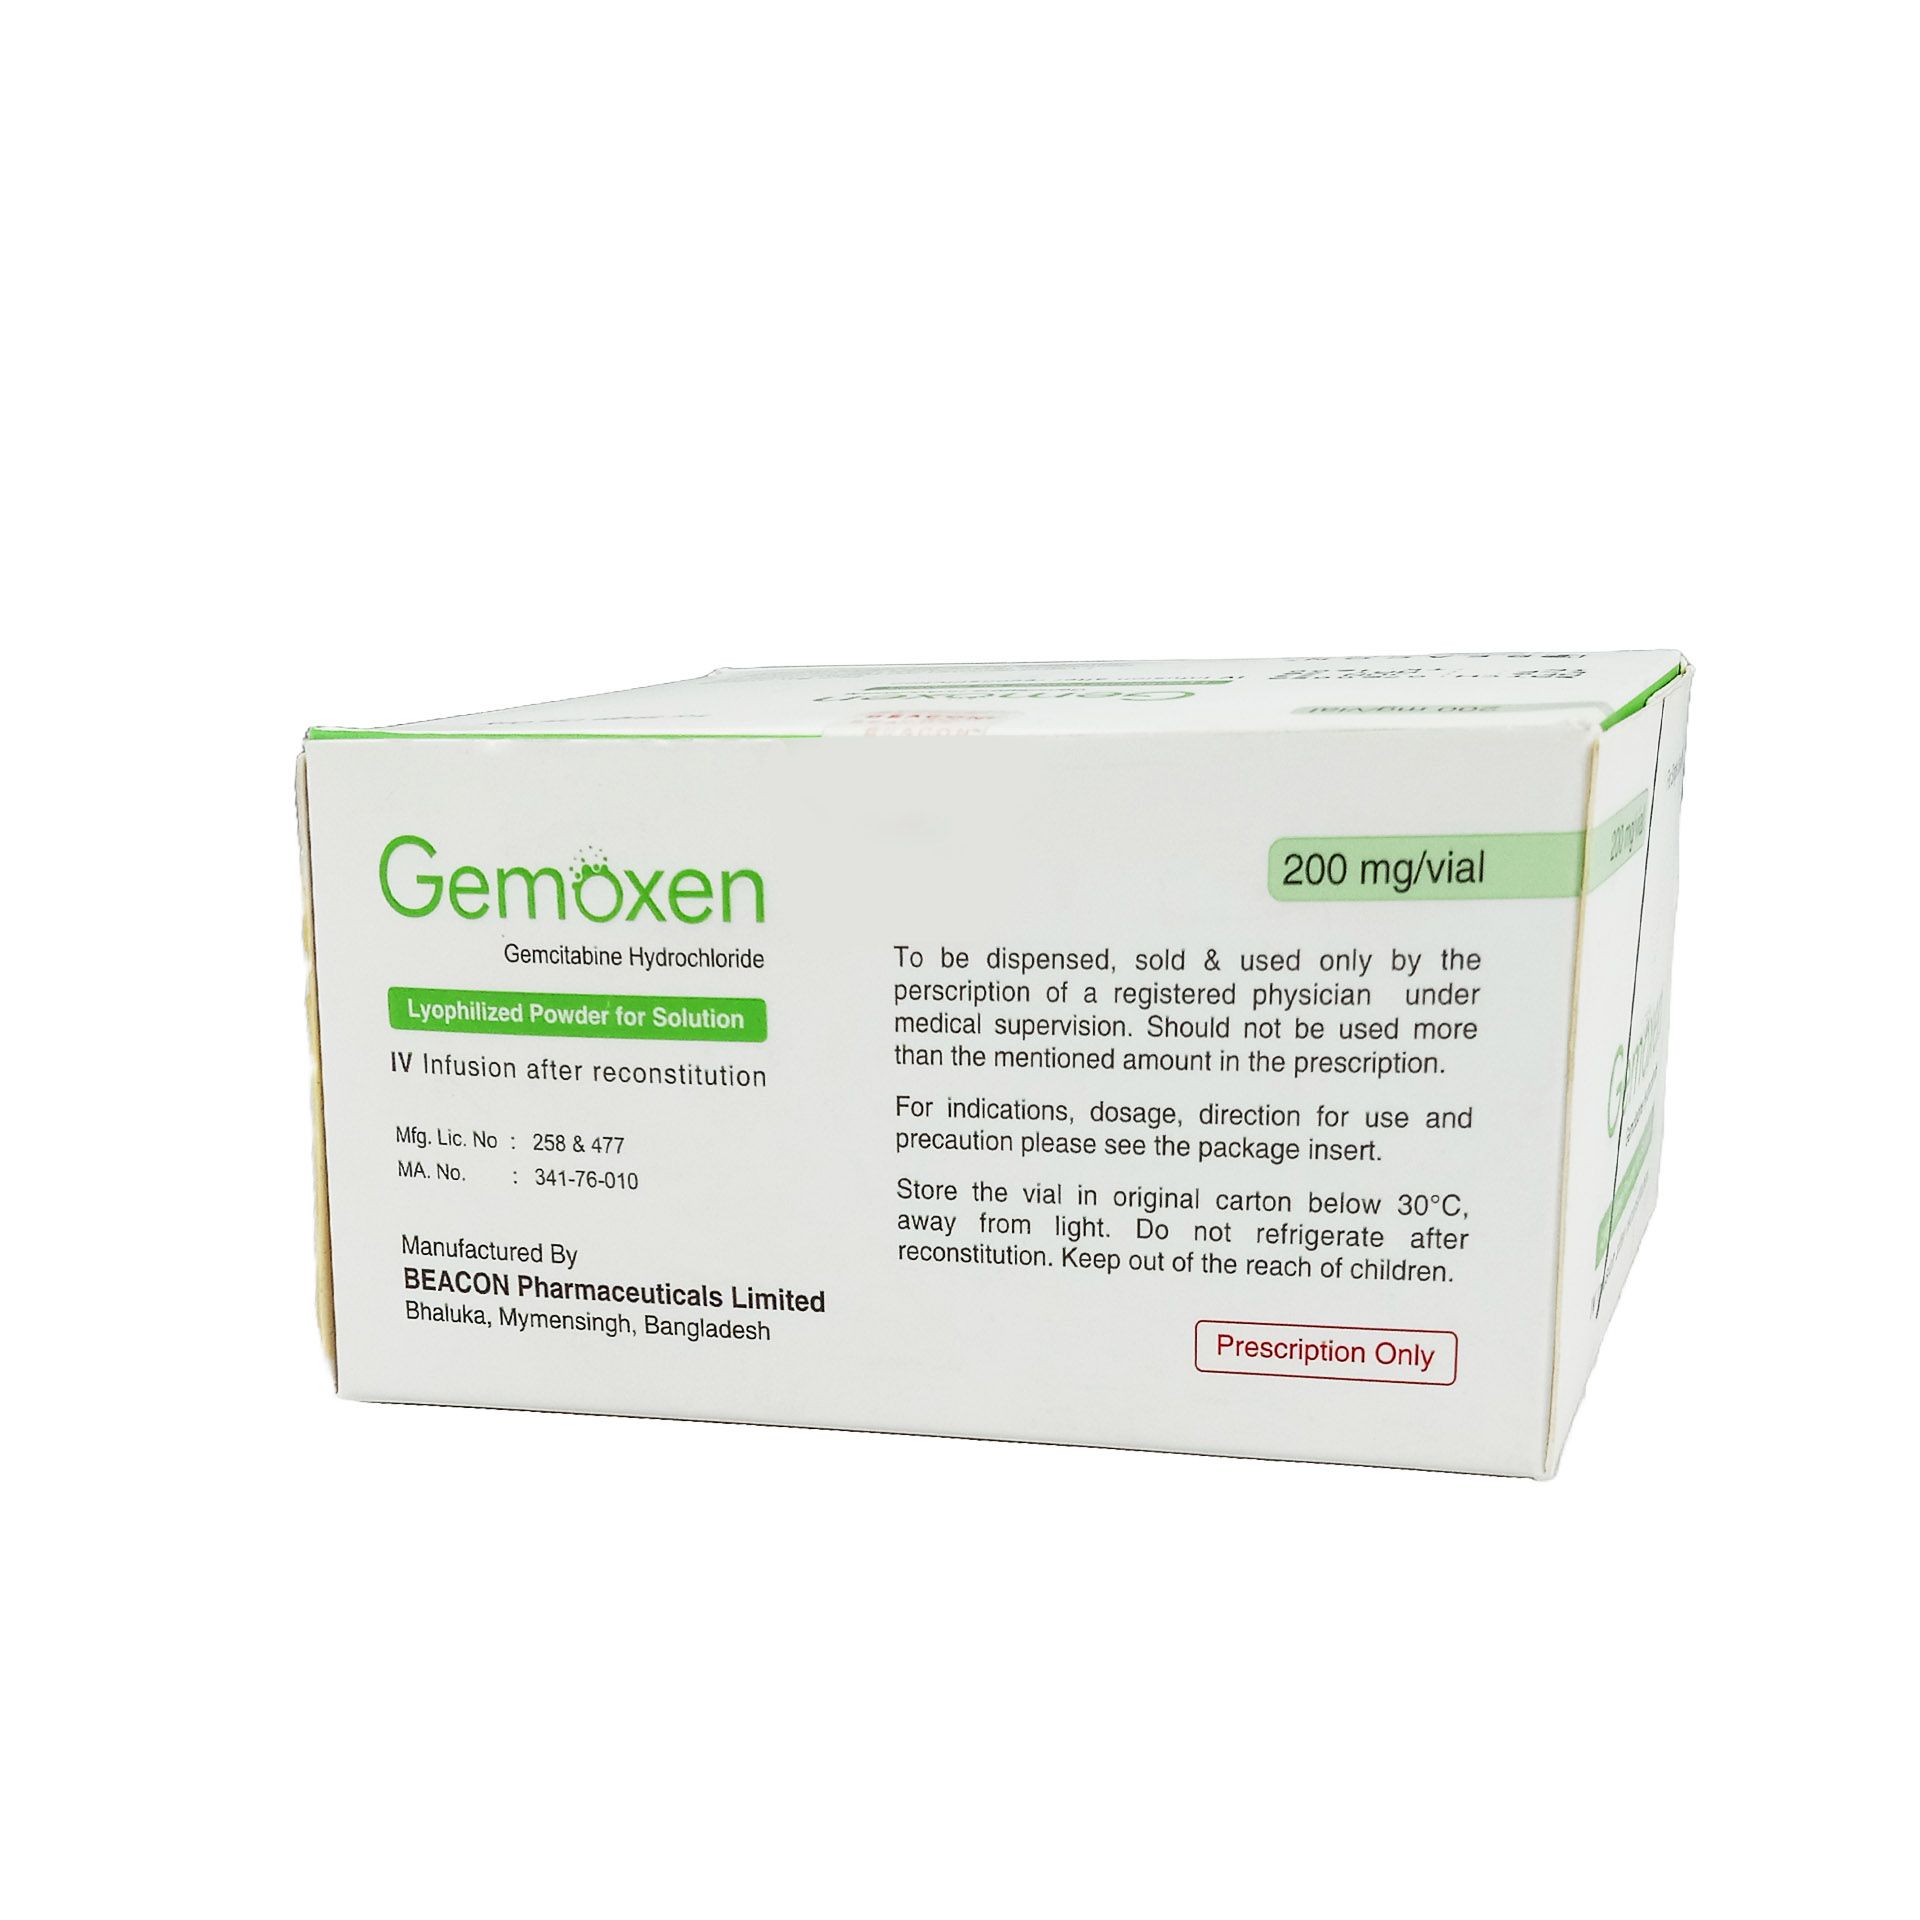 Gemoxen 200mg/vial Injection